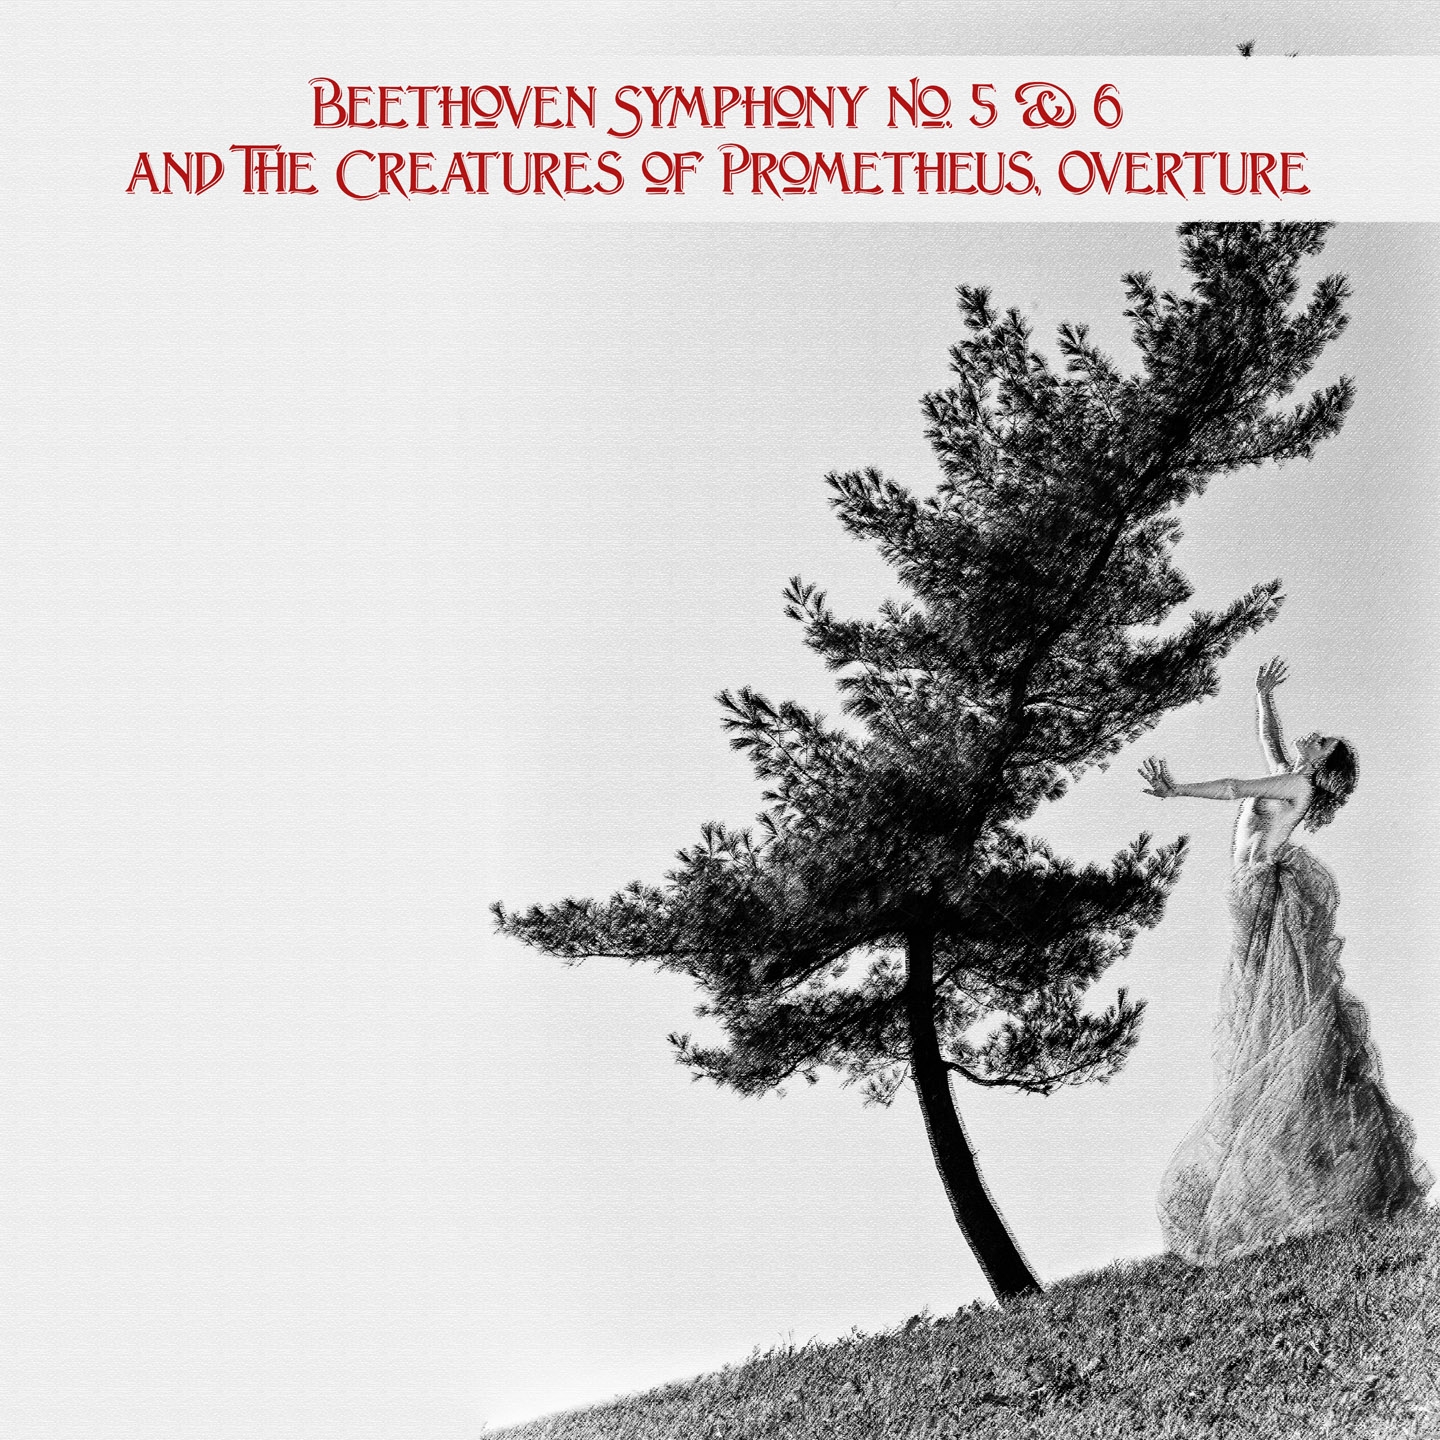 Beethoven Symphony No. 5 & 6 and The Creatures of Prometheus, Overture